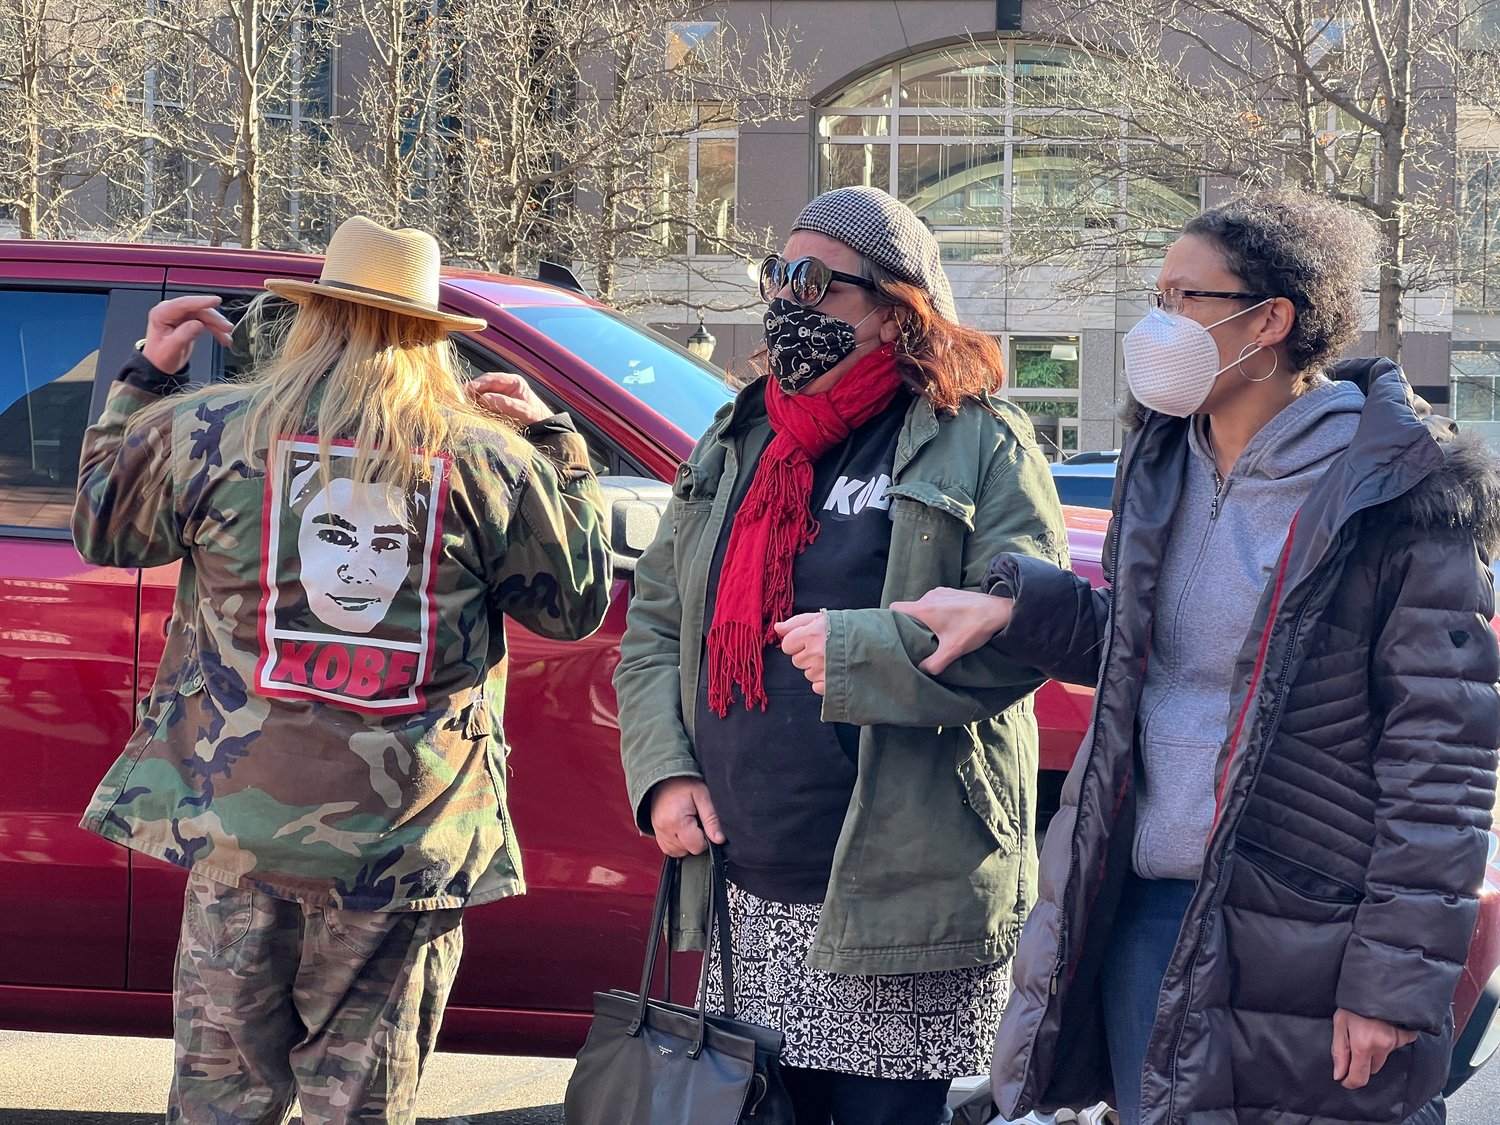 Family members of Kobe Dimock-Heisler show their solidarity with Amir Locke’s family at an April 8 rally and march in downtown Minneapolis. Heisler, who was autistic, was shot and killed by Brooklyn Center police officers during a domestic disturbance at his grandparents' home in August 2019. Heisler's grandfather had reportedly tried to cancel the call before police arrived, as the situation had already deescalated.